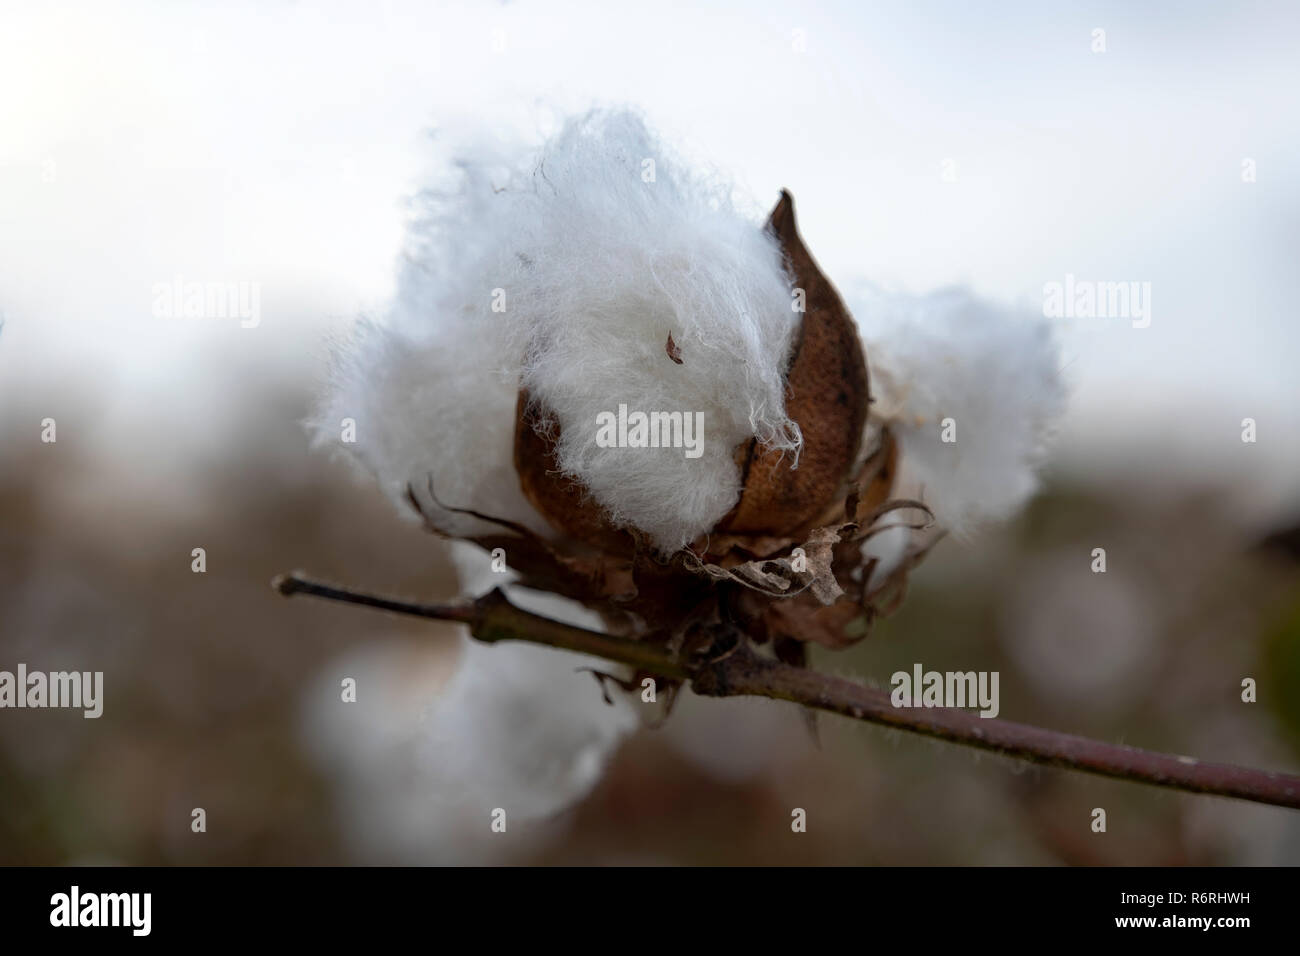 White fluff cotton plants on a blurred background close-up. Greece Stock Photo